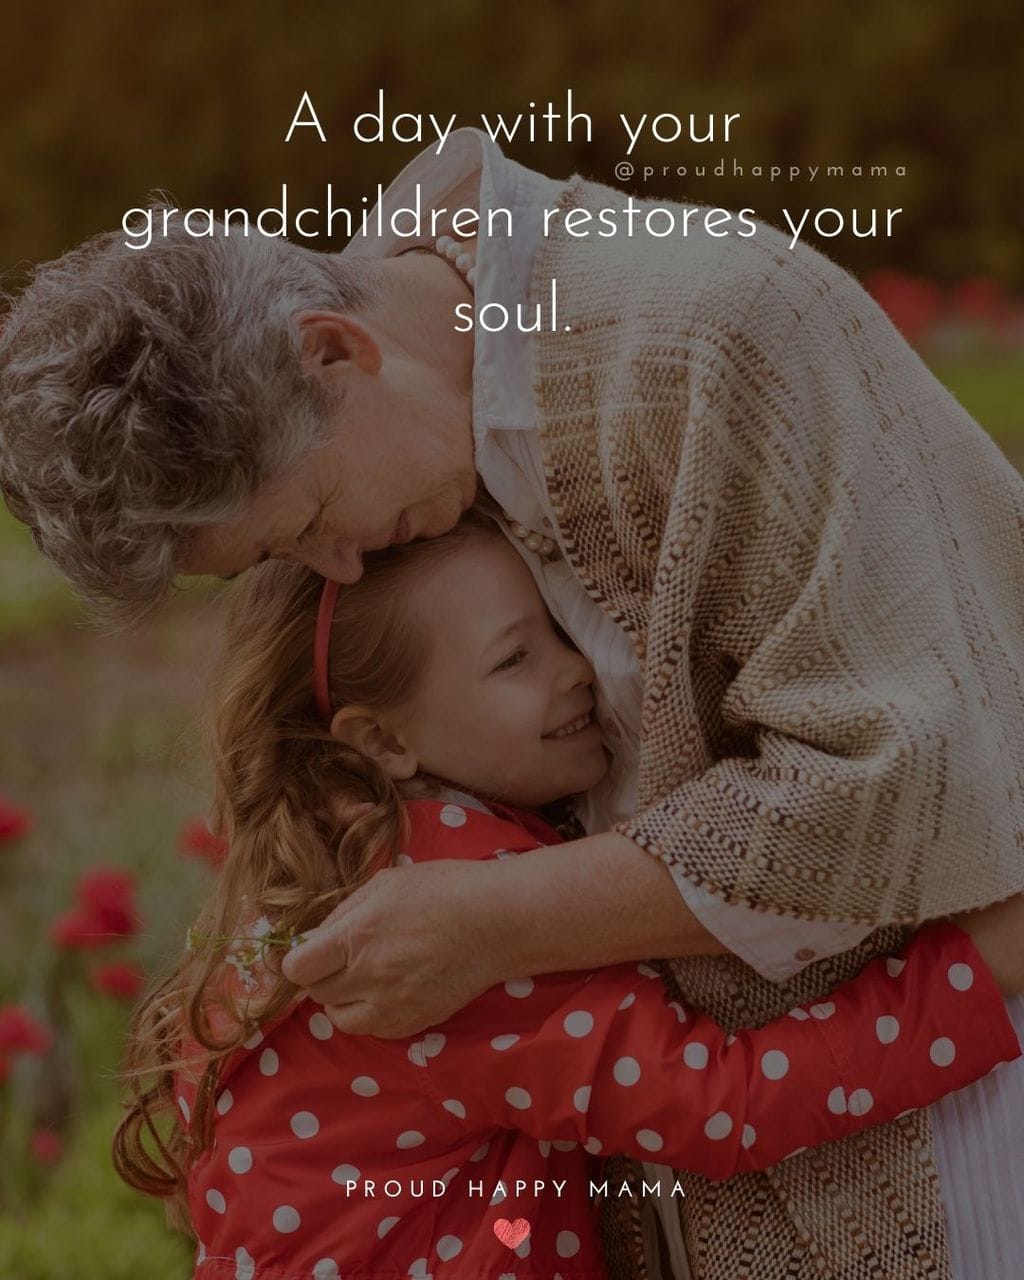 Quotes for Grandchildren - A day with your grandchildren restores your soul.